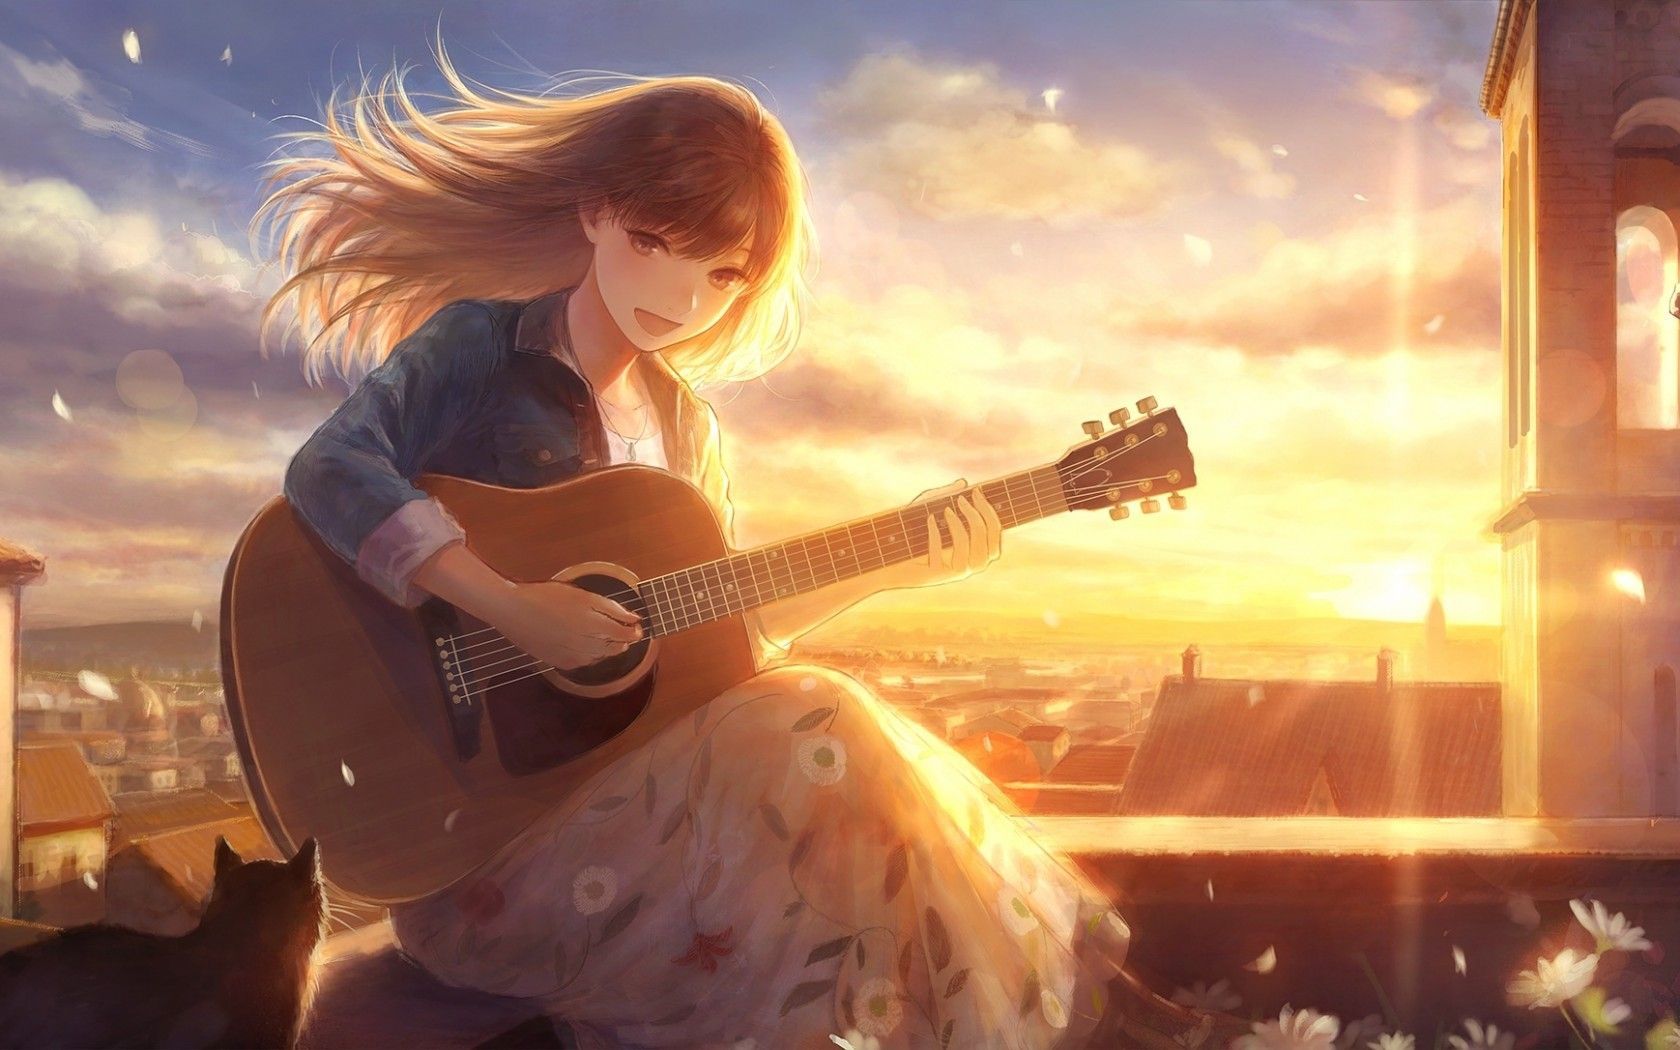 Anime with Guitar Wallpaper Free Anime with Guitar